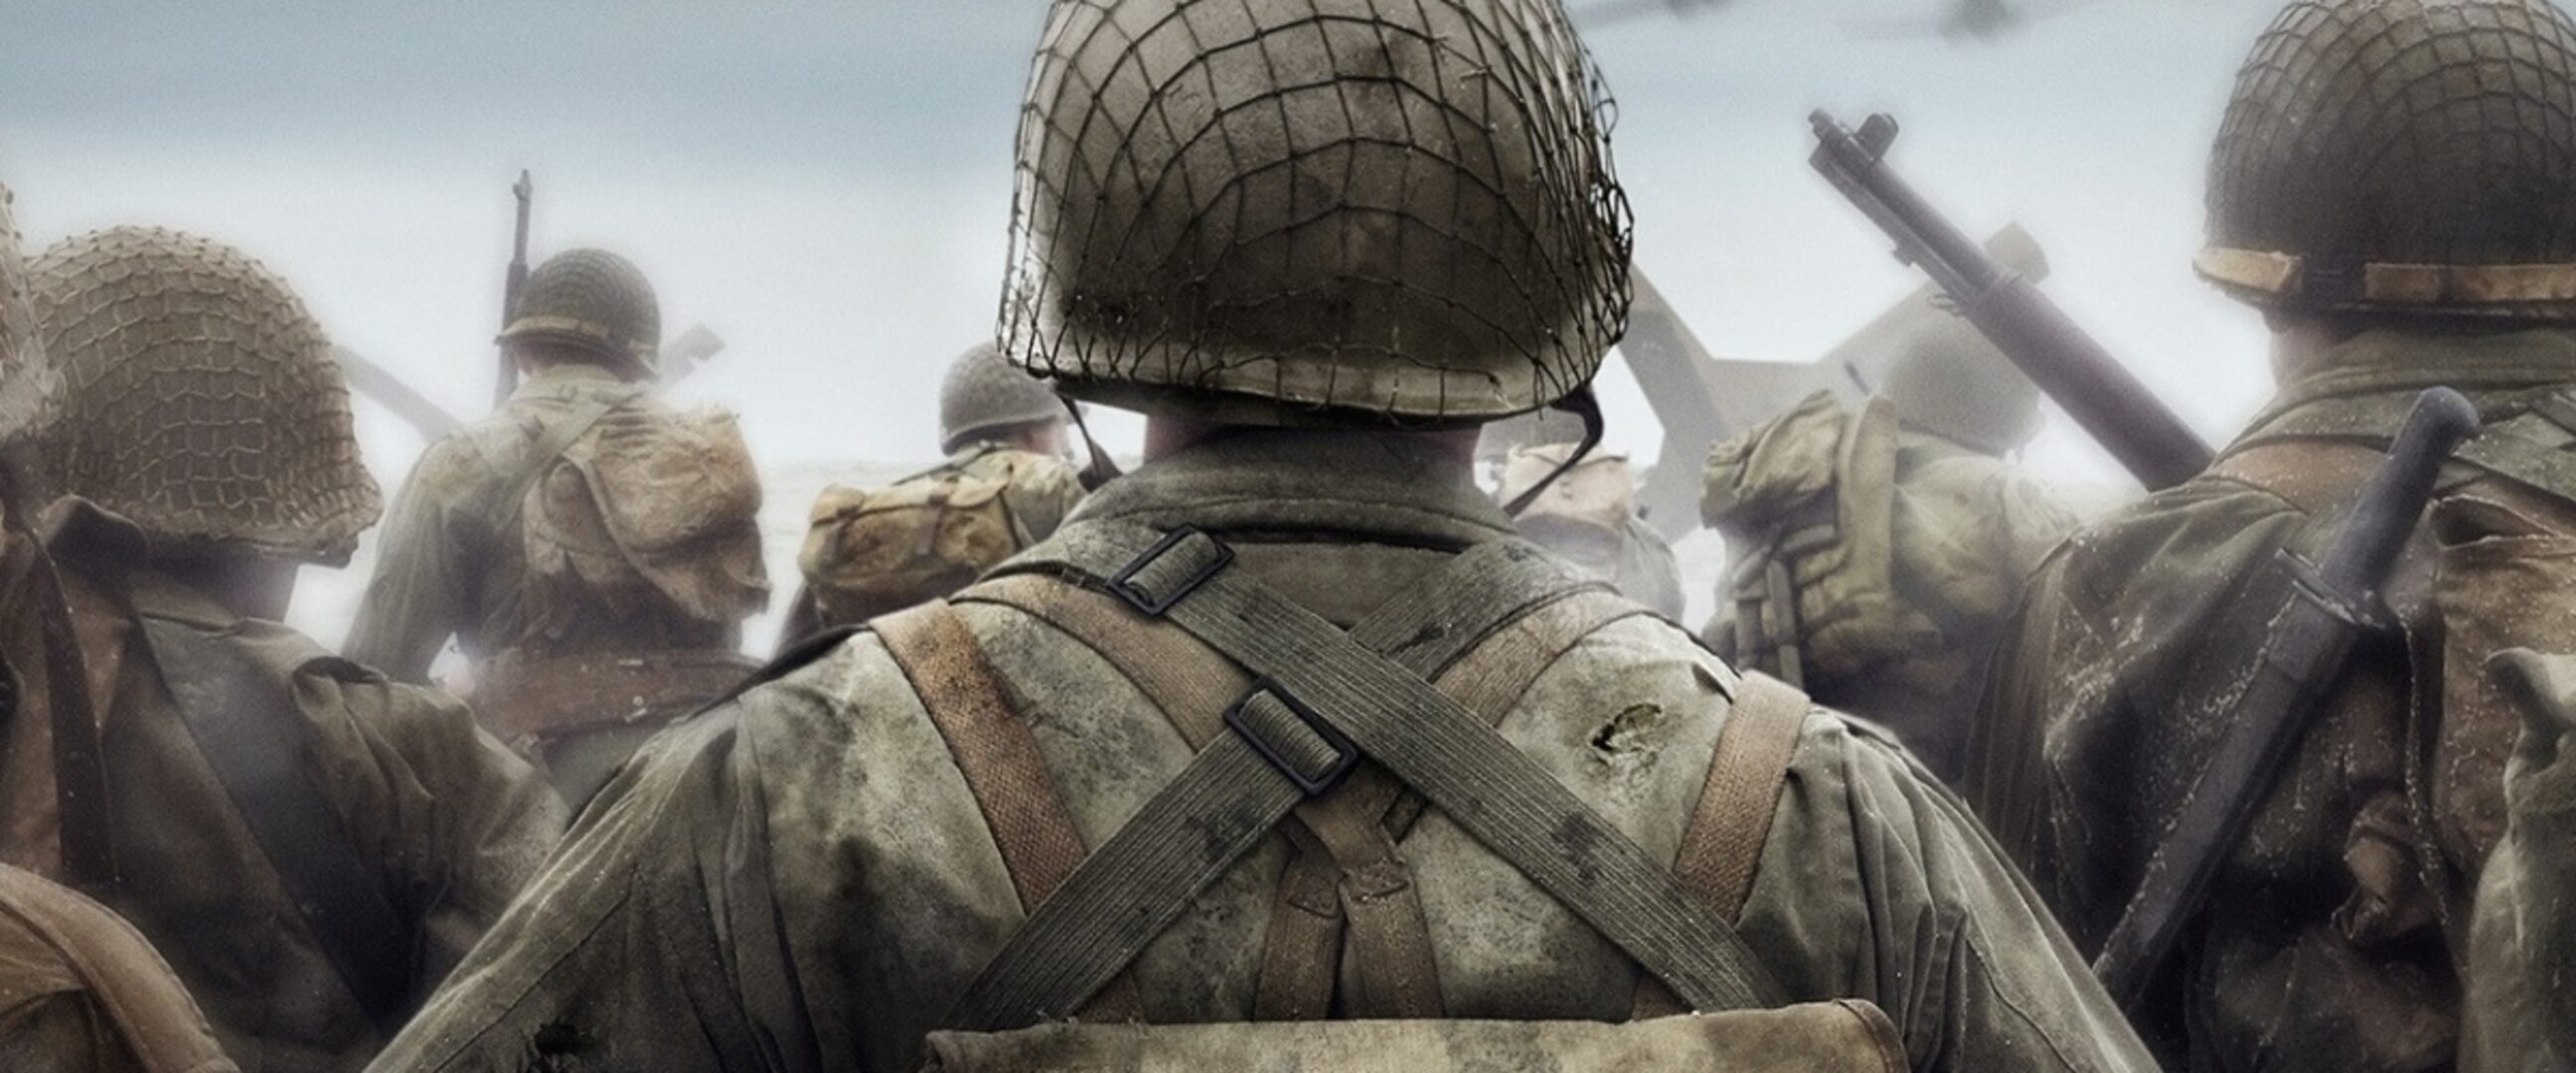 Call of Duty®: WWII - Call of Duty™ Endowment Fear Not Pack on Steam